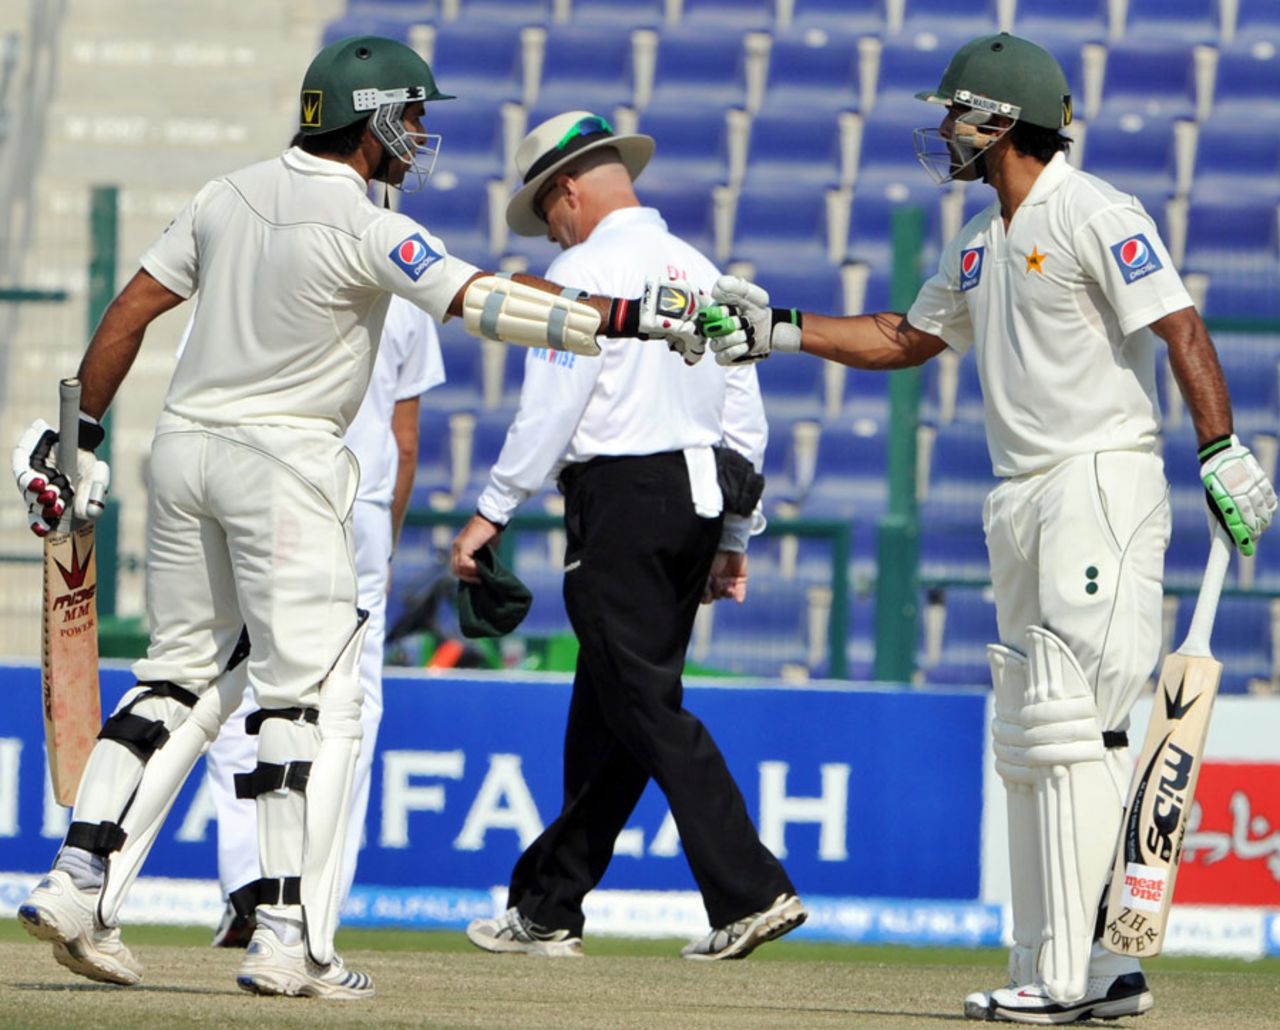 Pakistan's openers, Mohammad Hafeez and Taufeeq Umar, made a steady start, Pakistan v South Africa, 2nd Test, Abu Dhabi, 5th day, November 24, 2010